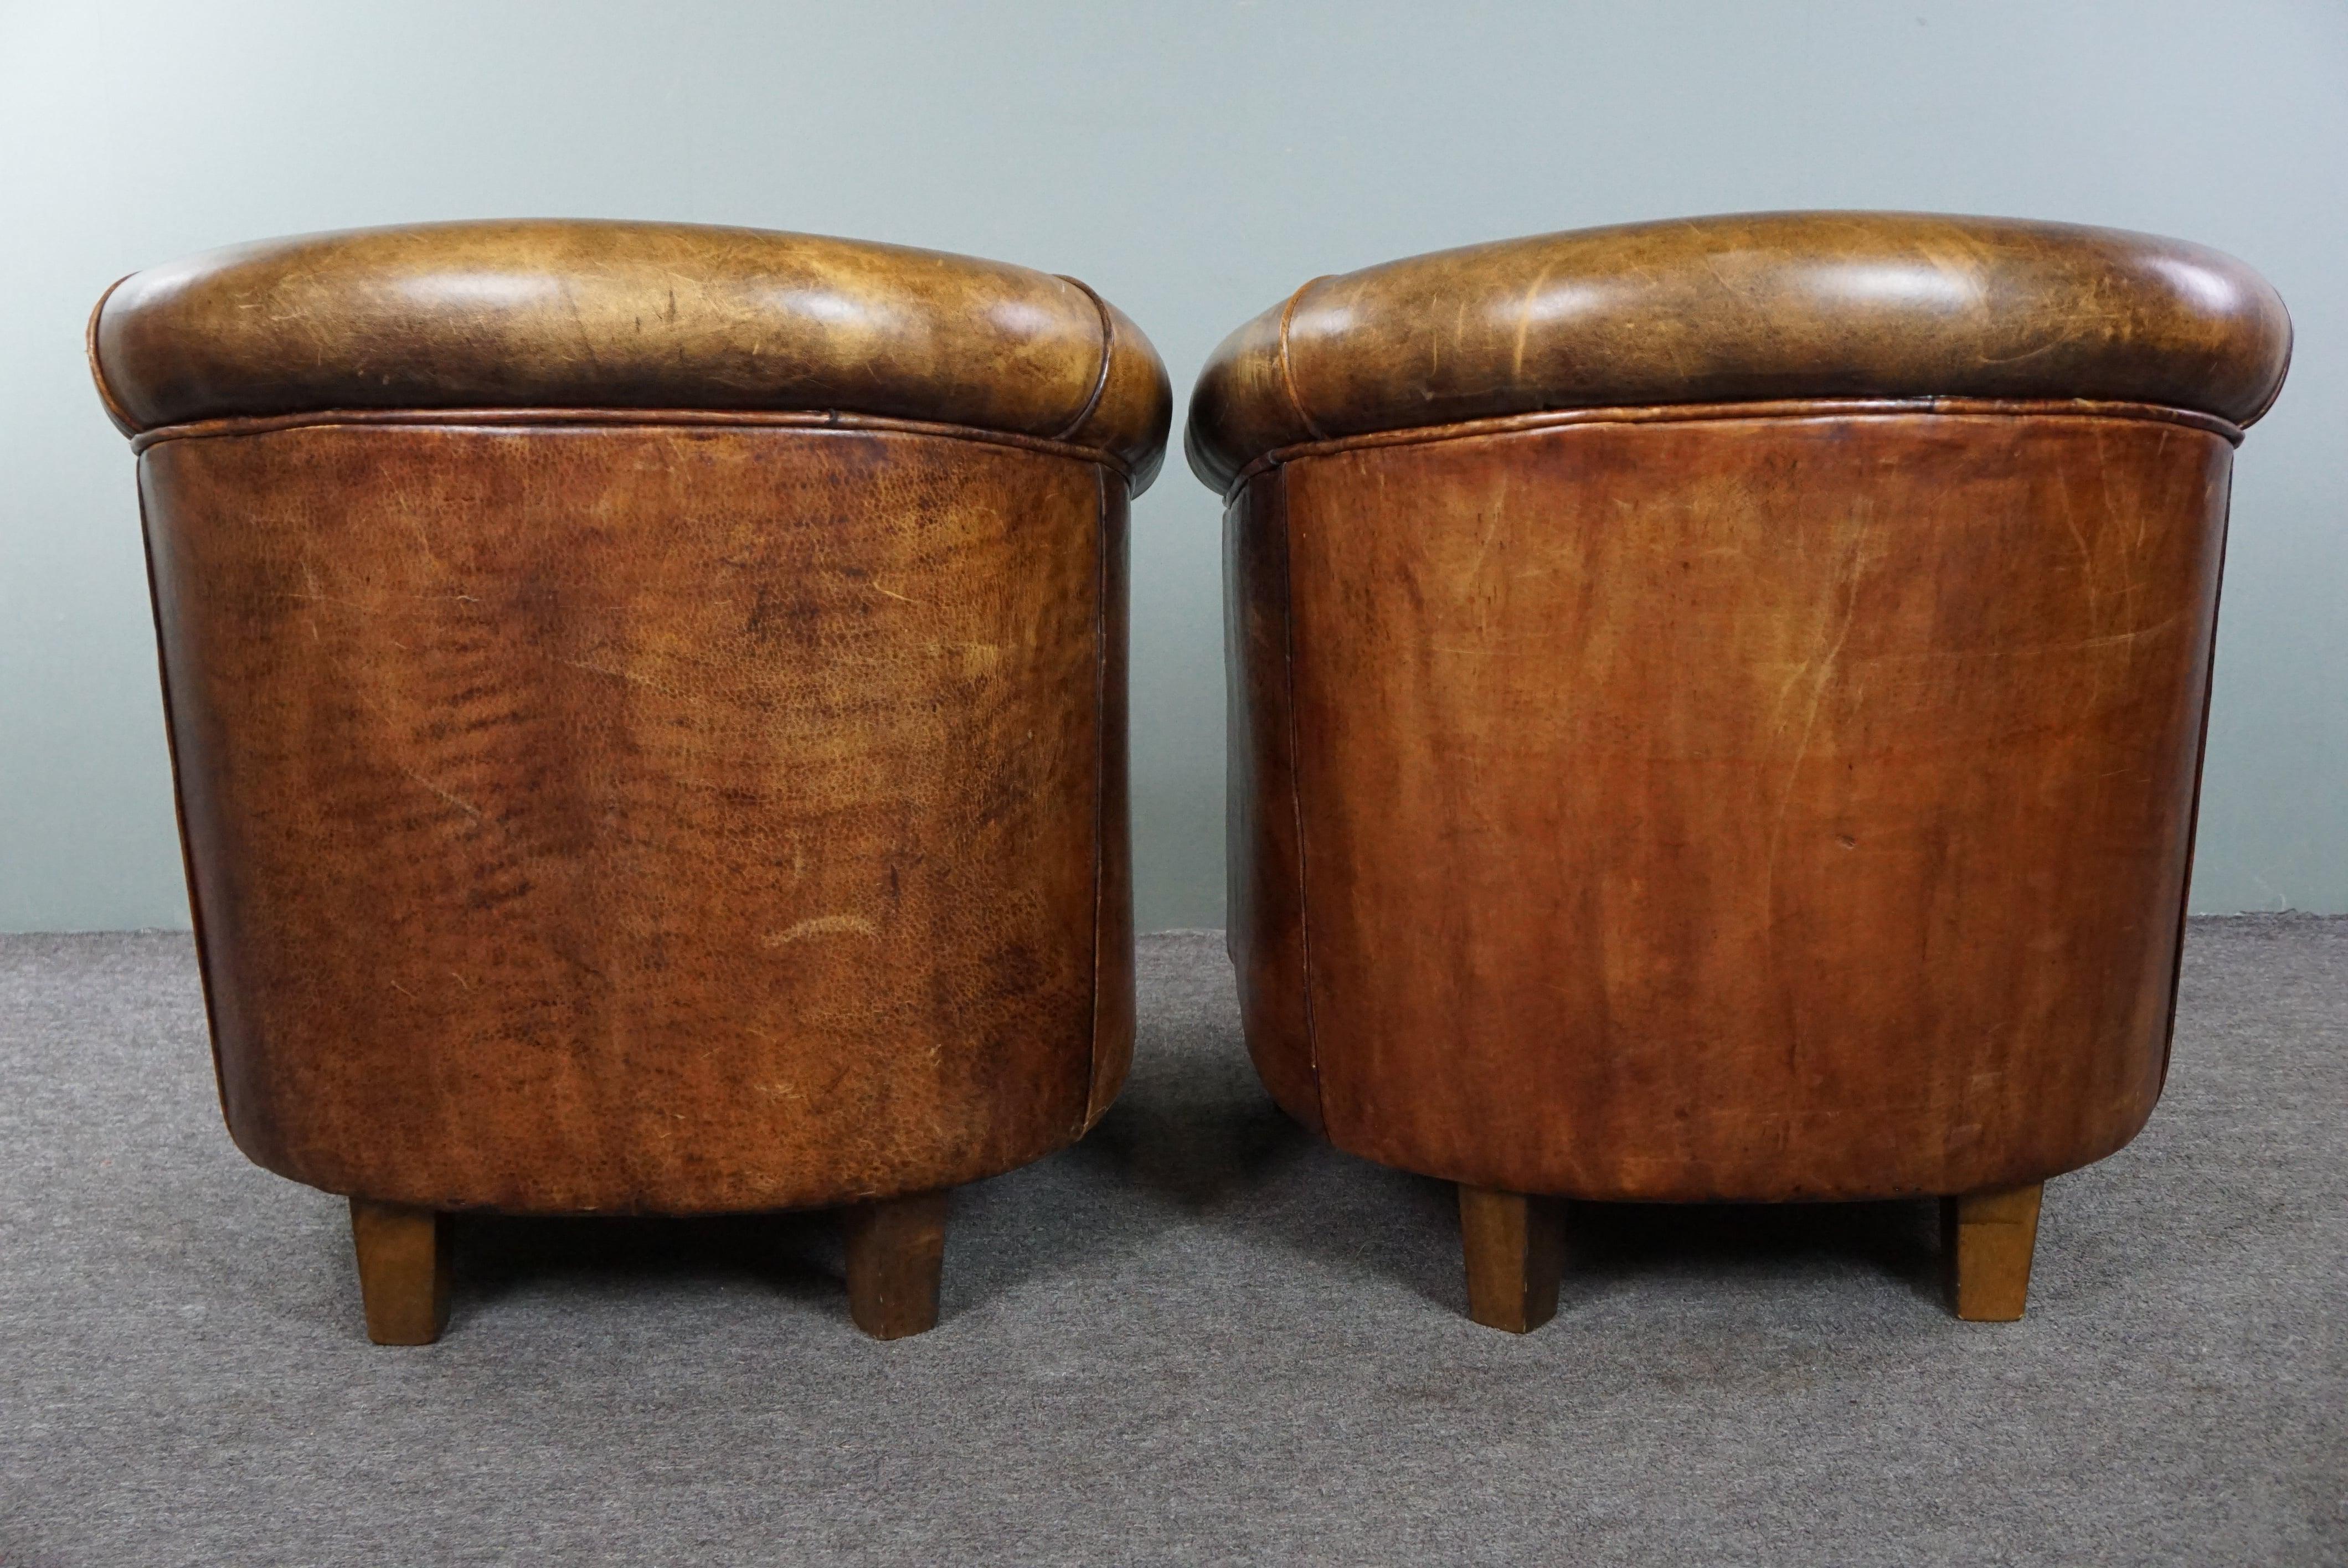 Hand-Crafted Set of two sturdy sheep leather club chairs, beautiful dark cognac color